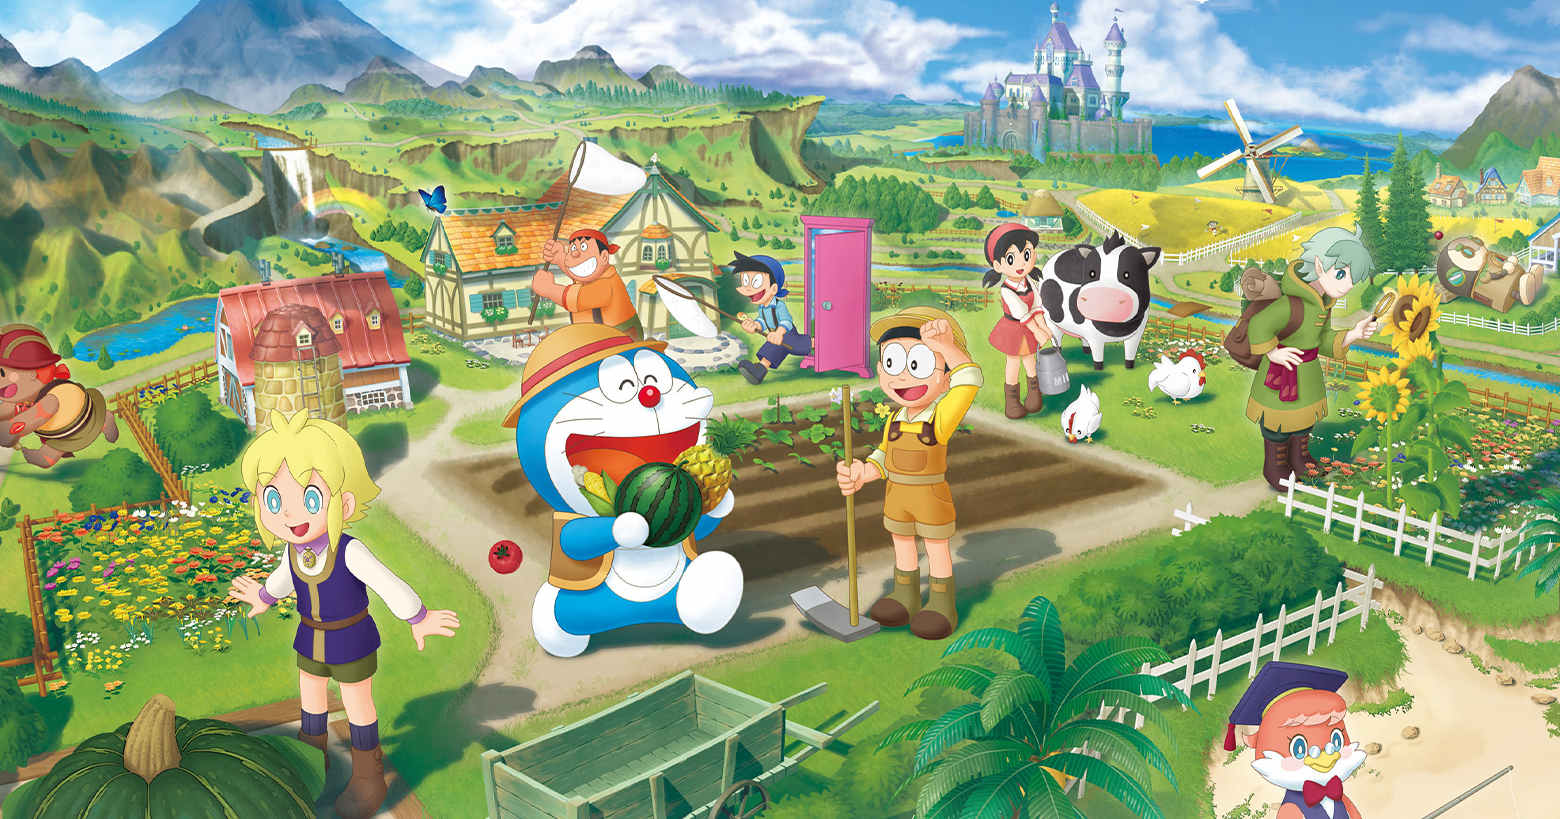 Play the new part of the Doraemon game. Here we can see the cover of the new title, which features the famous robot cat together with the other characters in front of a built farm landscape. The cute blue and white cat with a big round head and a round straw hat can be seen in the center of the picture next to a farmer in brown leather pants, a white shirt, and a yellow hat. The cat is holding a watermelon and a pineapple in its hands, which it is about to eat with its mouth wide open. The farmer looks at the cat laughing, while he wipes the sweat from his forehead. In his right hand, he holds a pickaxe, which he has placed on the ground. They are standing in front of a brownfield. Around the two of them are other farm characters with different looks and different clothes. They stand around beds and plants, looking jauntily in different directions. In the back, two figures are hunting insects with nets. This beautiful green landscape in broad daylight extends into the distant background, where a blue lake and a magnificent castle are also depicted on the right. On the left, we can see a large pointed mountain in the distance.